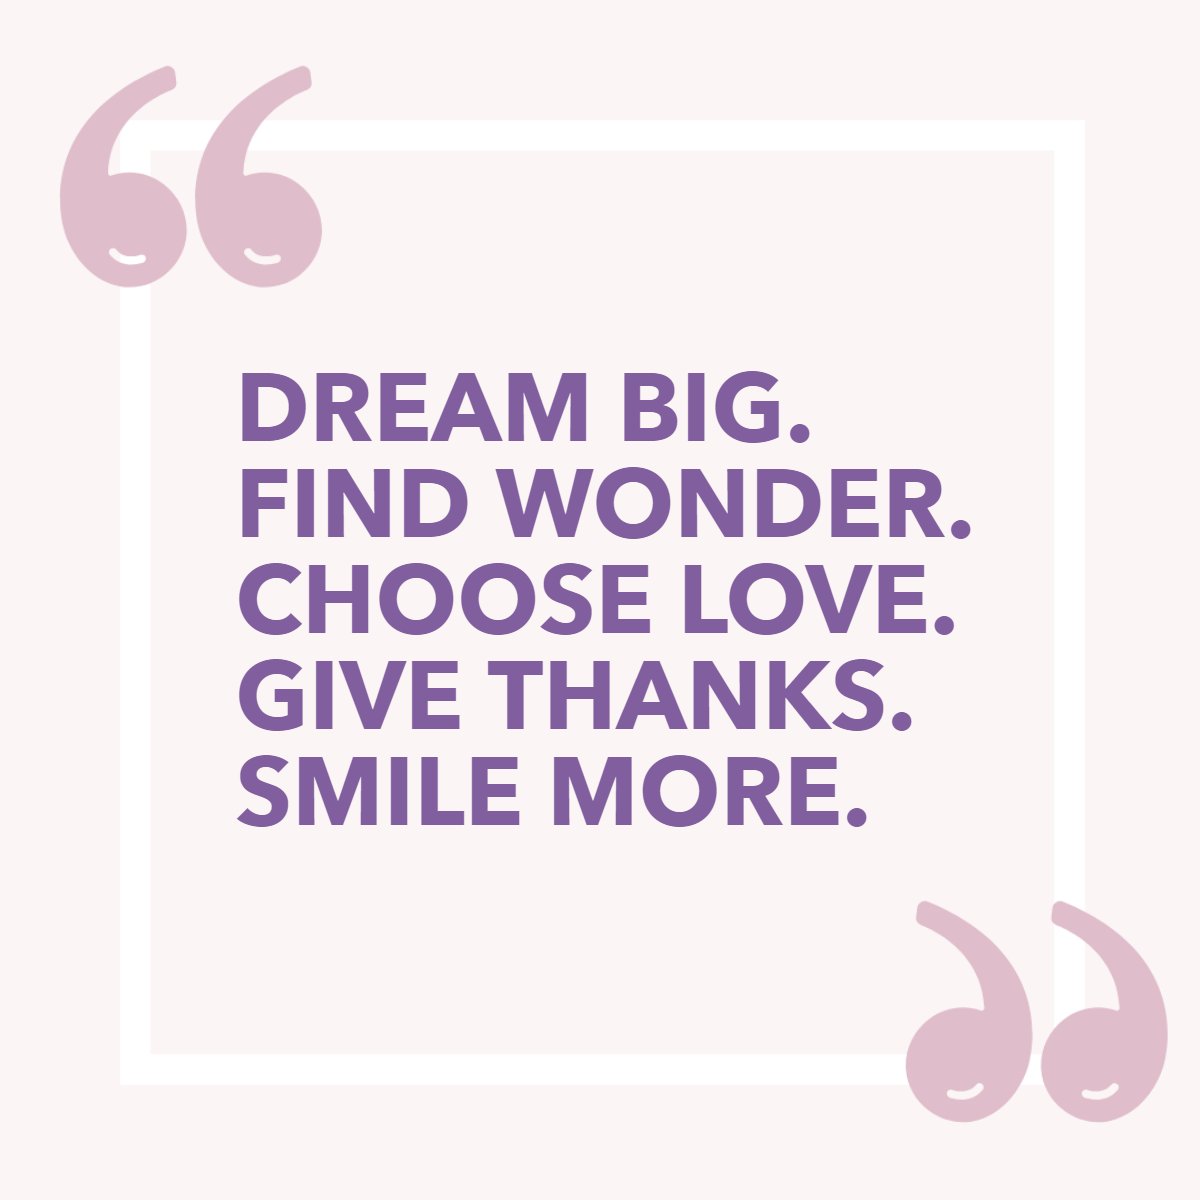 Dream Big.
Find Wonder. 
Choose Love. 
Give Thanks. 
Smile More.🤗

#dreambig    #givethanks    #smilemore    #bigdreams    #ichooselove    #findwonder    #smilemore
#lghomes #realtor #sellmyhome #findmyhome #citiesgroup